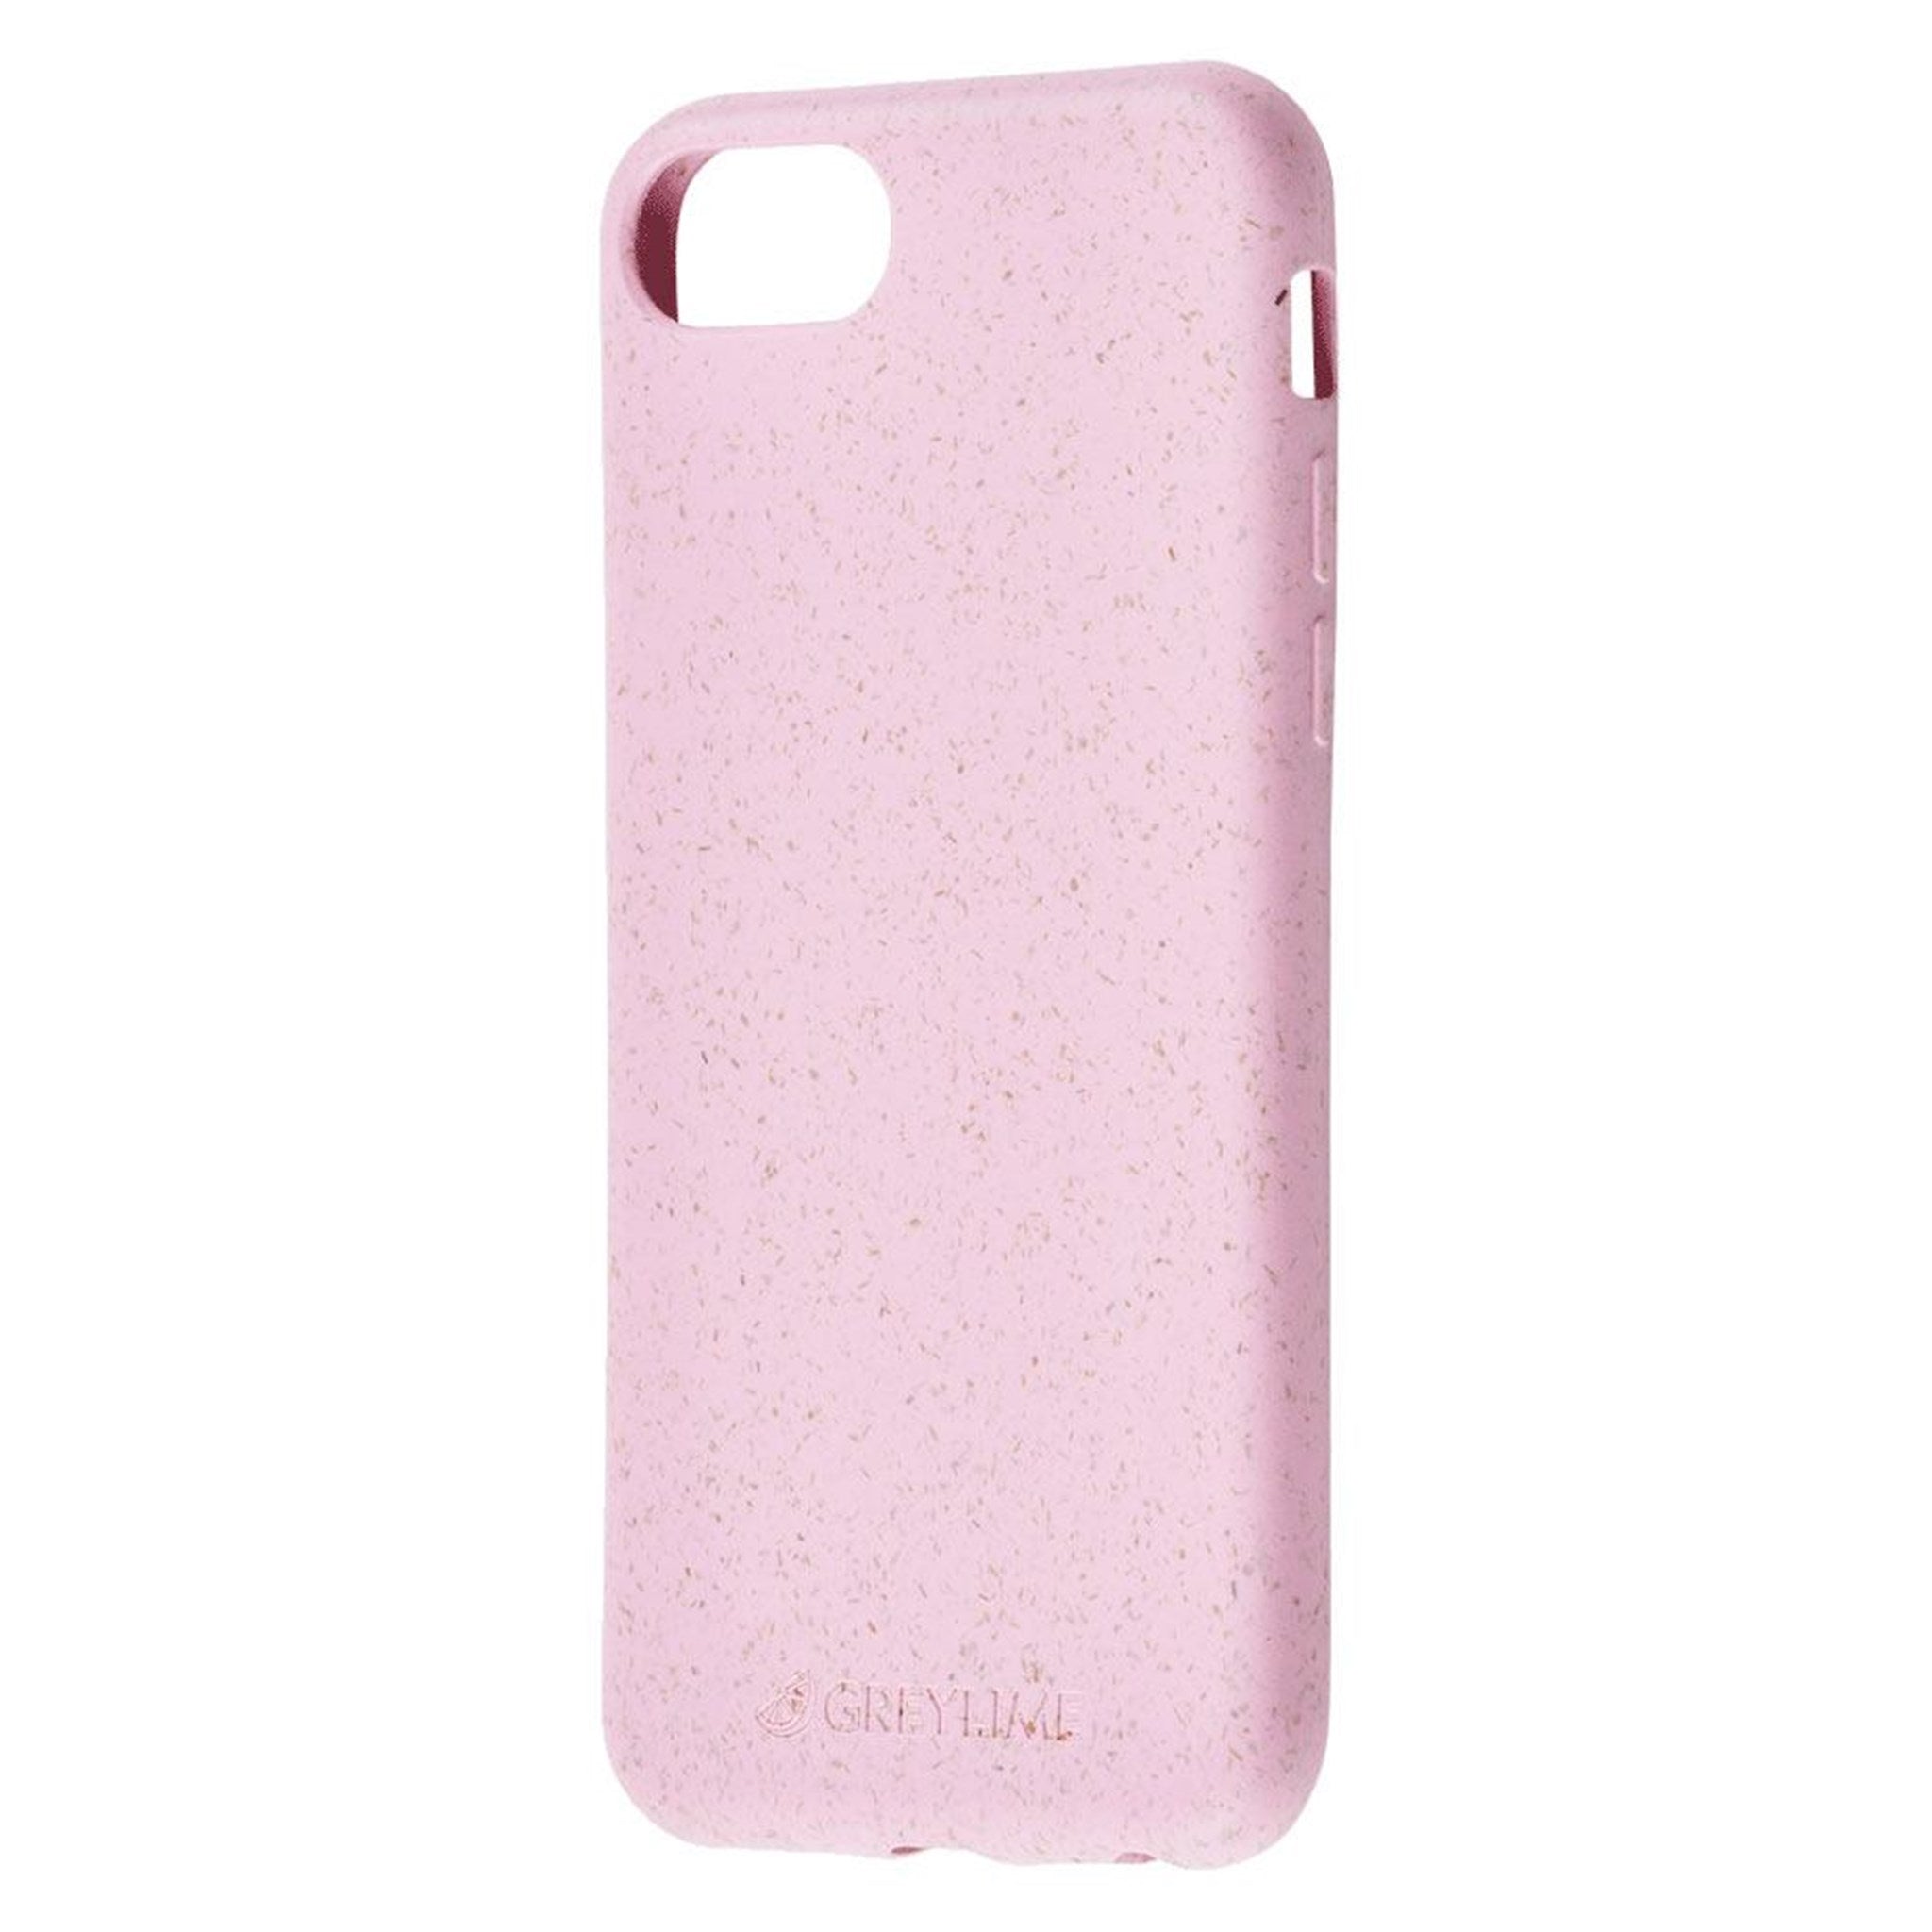 GreyLime-iPhone-6-7-8-Plus-biodegradable-cover-Pink-COIP678P05-V2.jpg